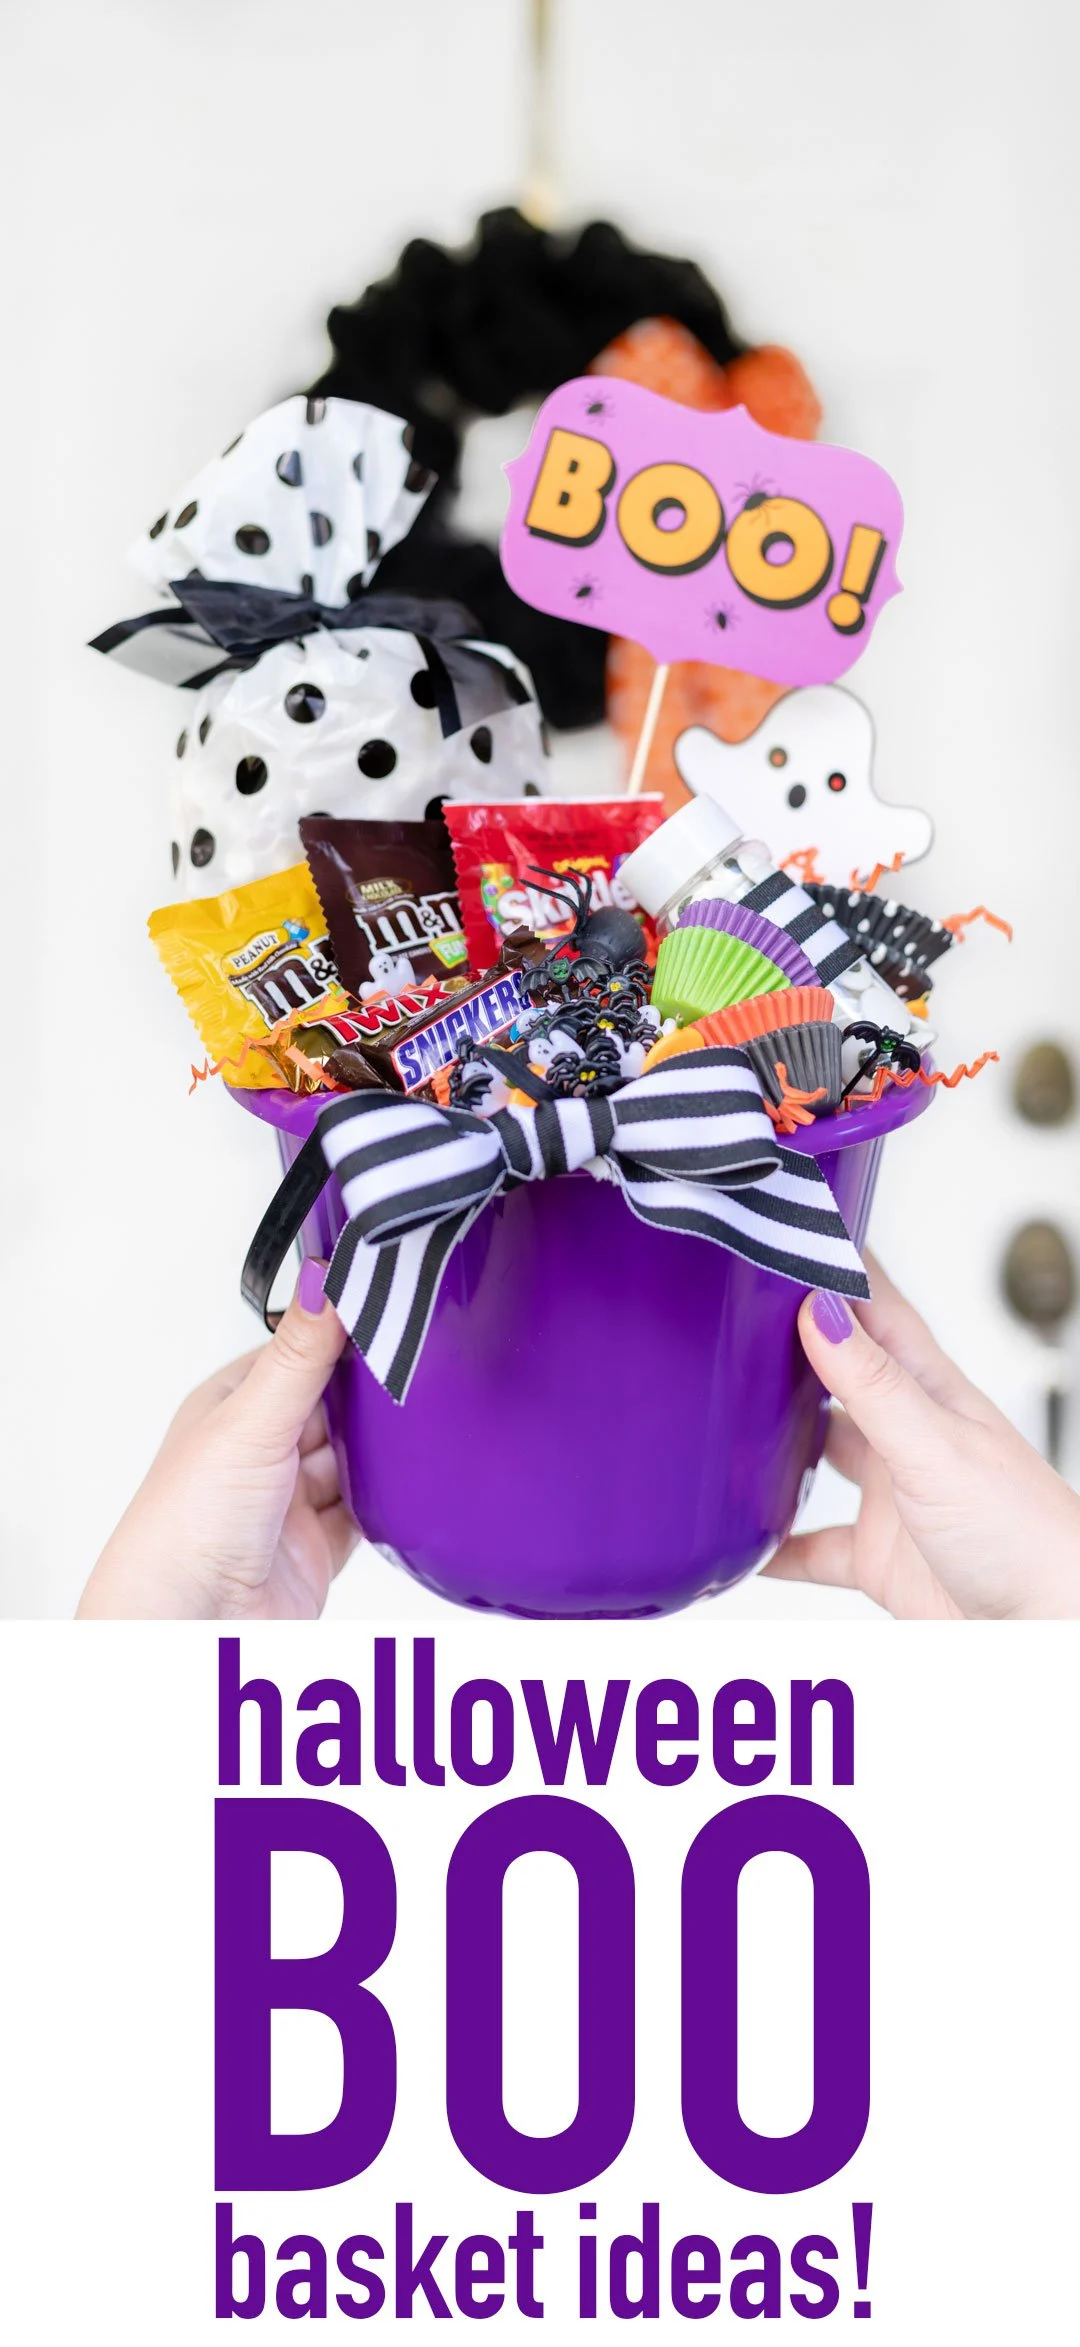 How to Boo Someone for Halloween. Boo gift basket ideas. 